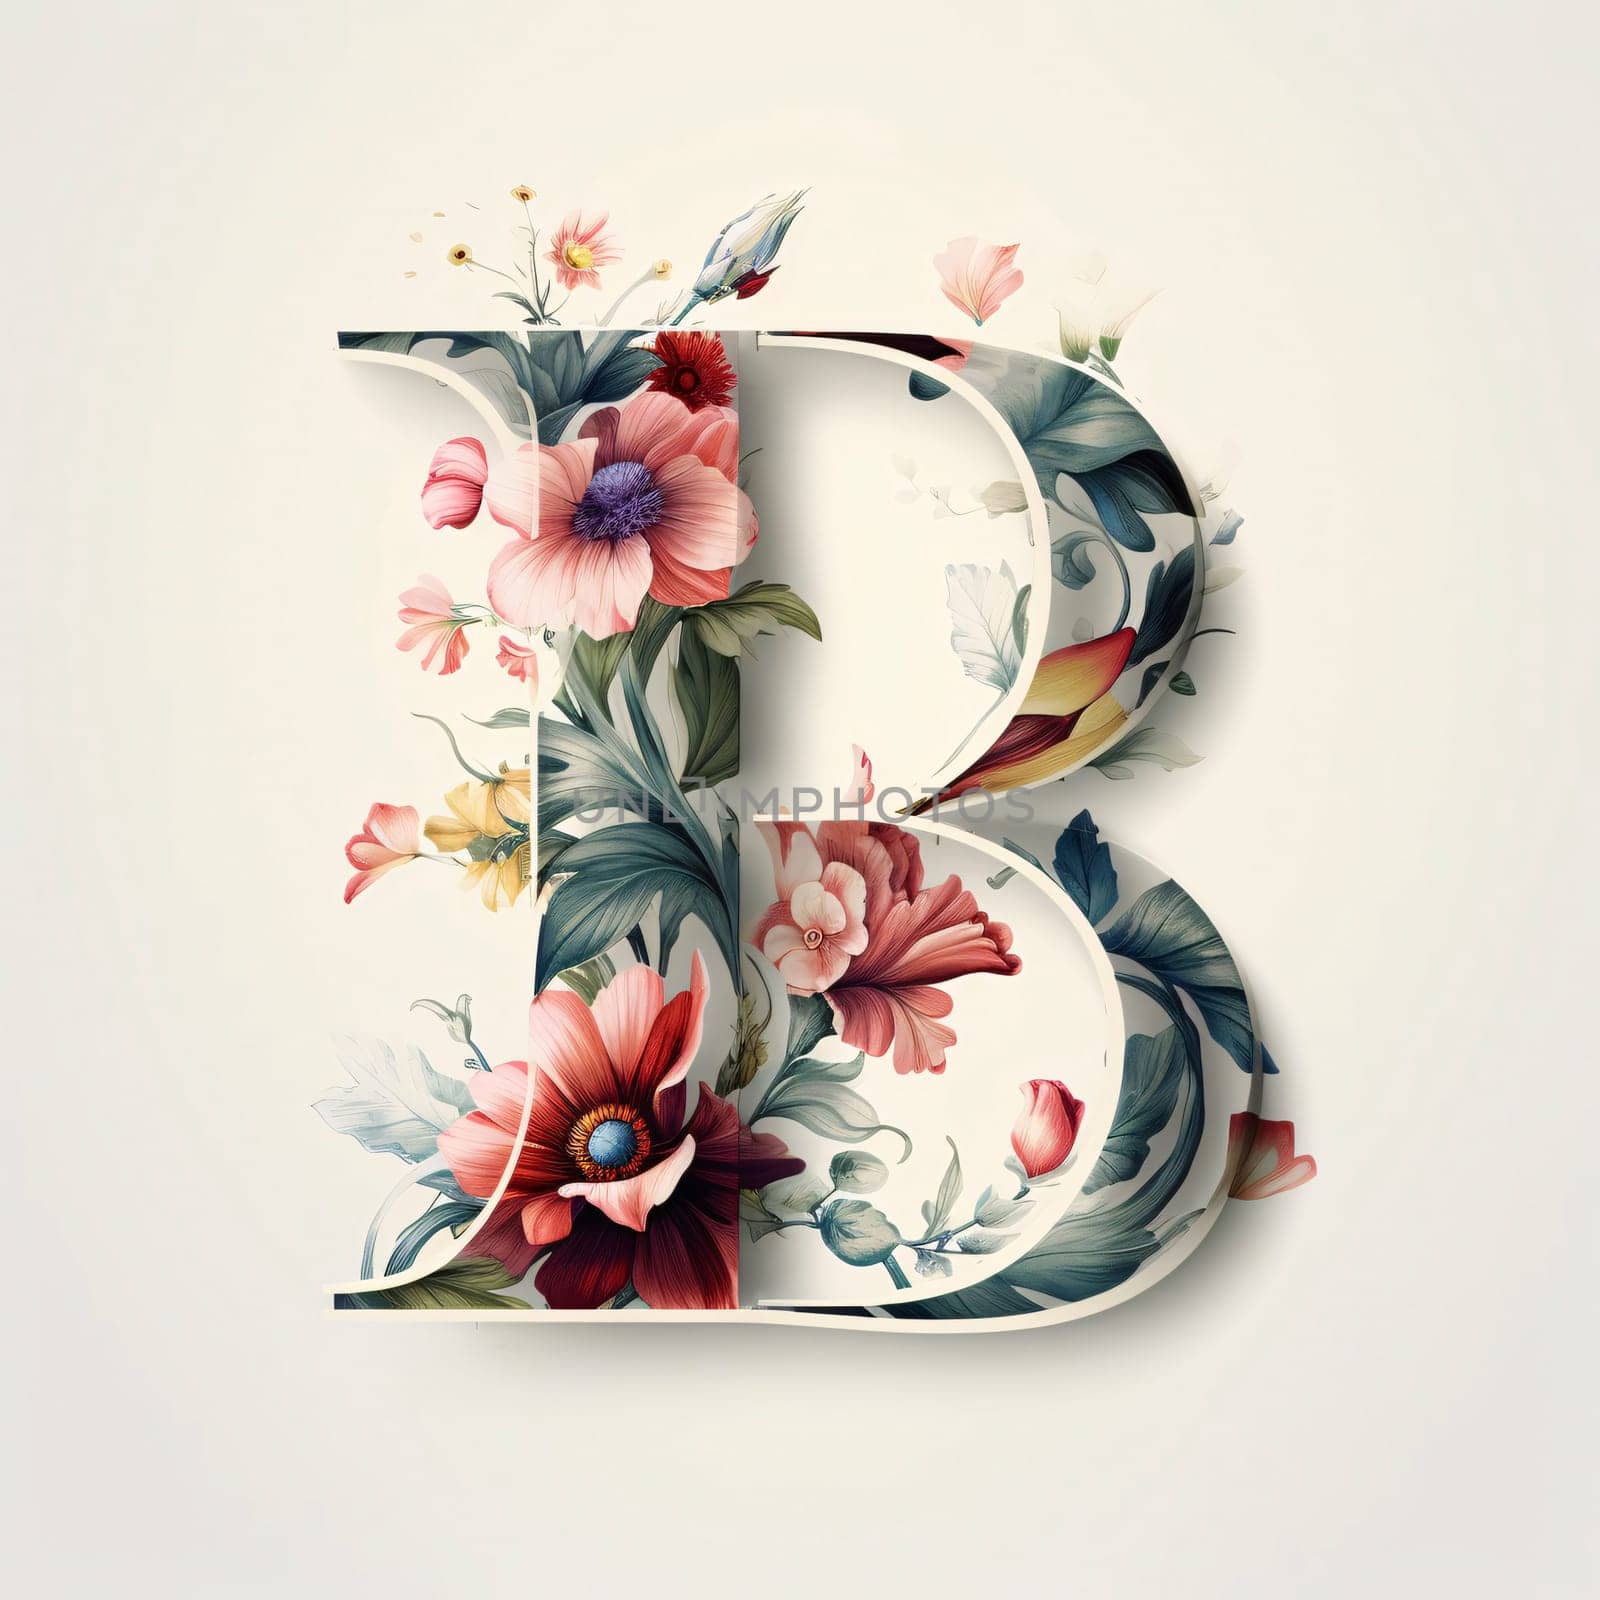 Graphic alphabet letters: Floral capital letter B, uppercase and lowercase version